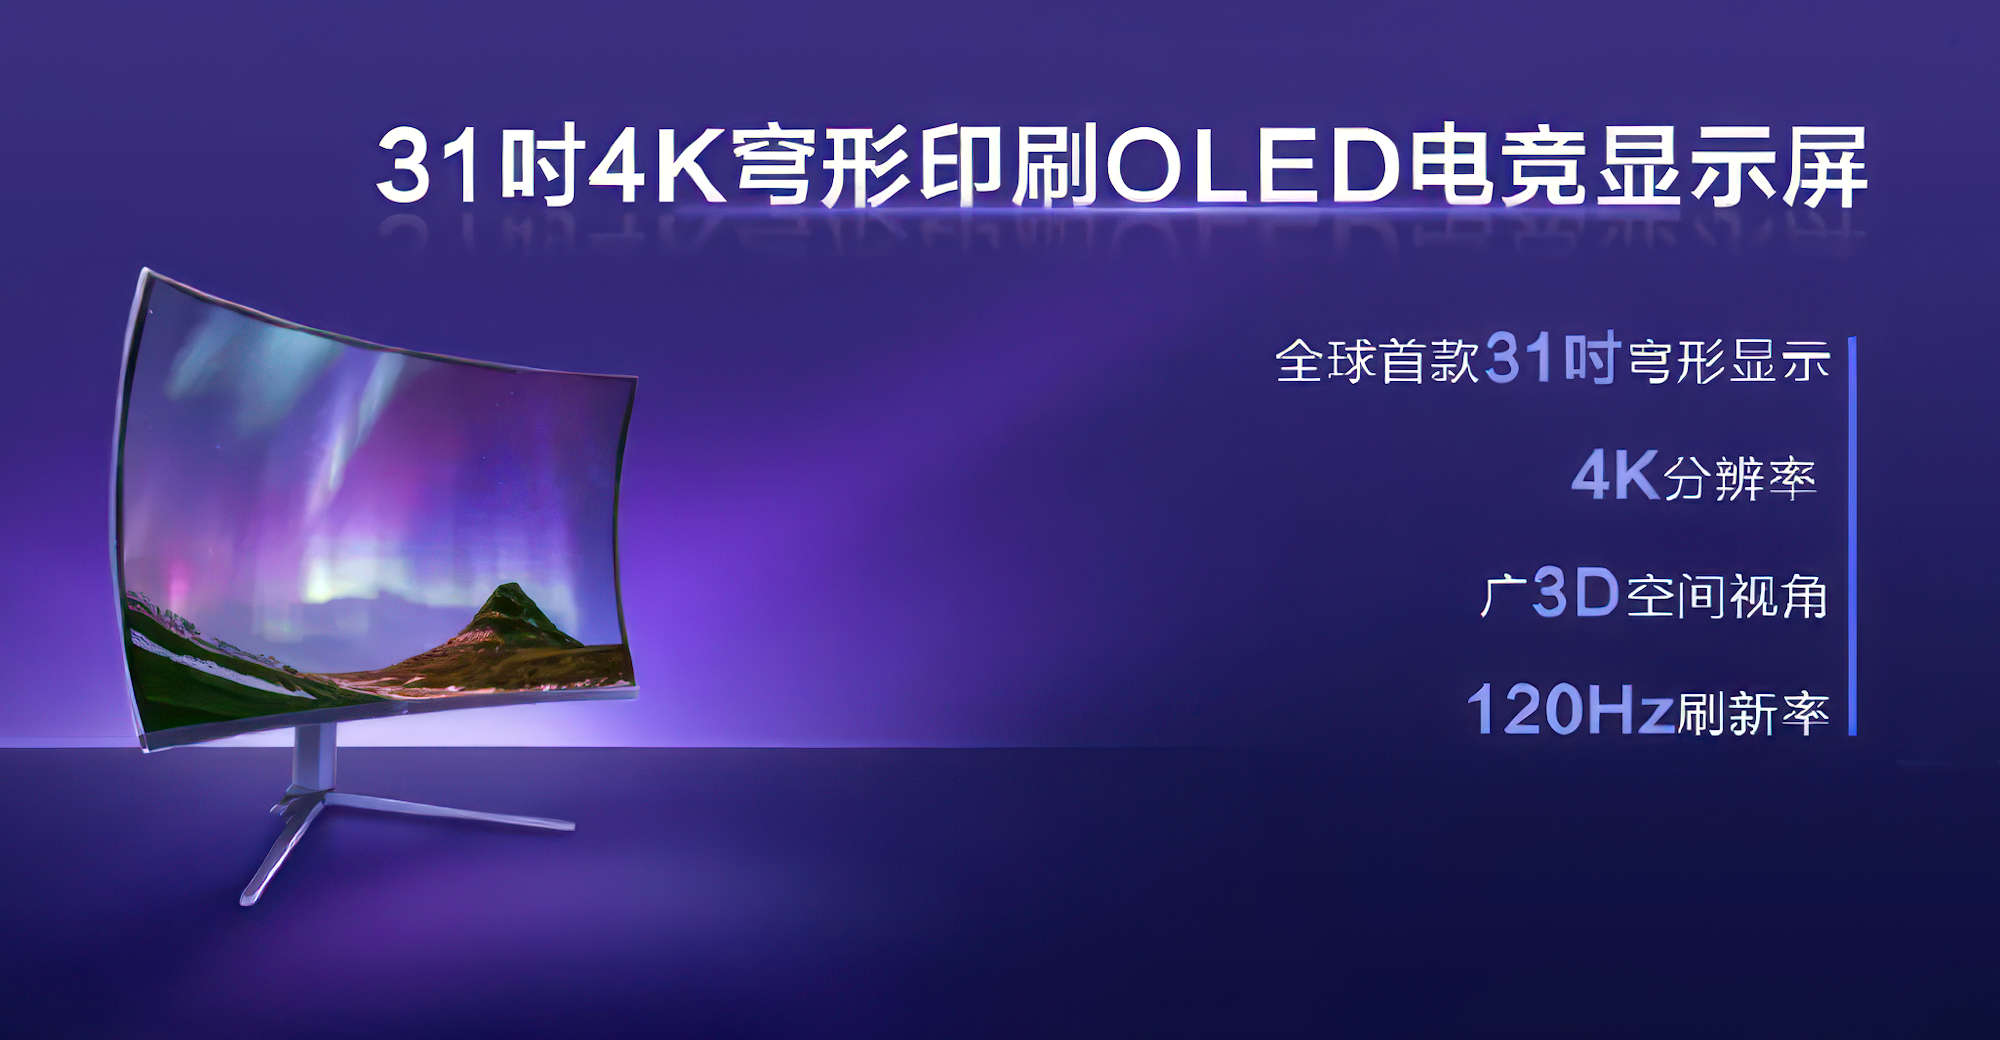 TCL-DOME-SHAPED-4K-MONITOR.jpg